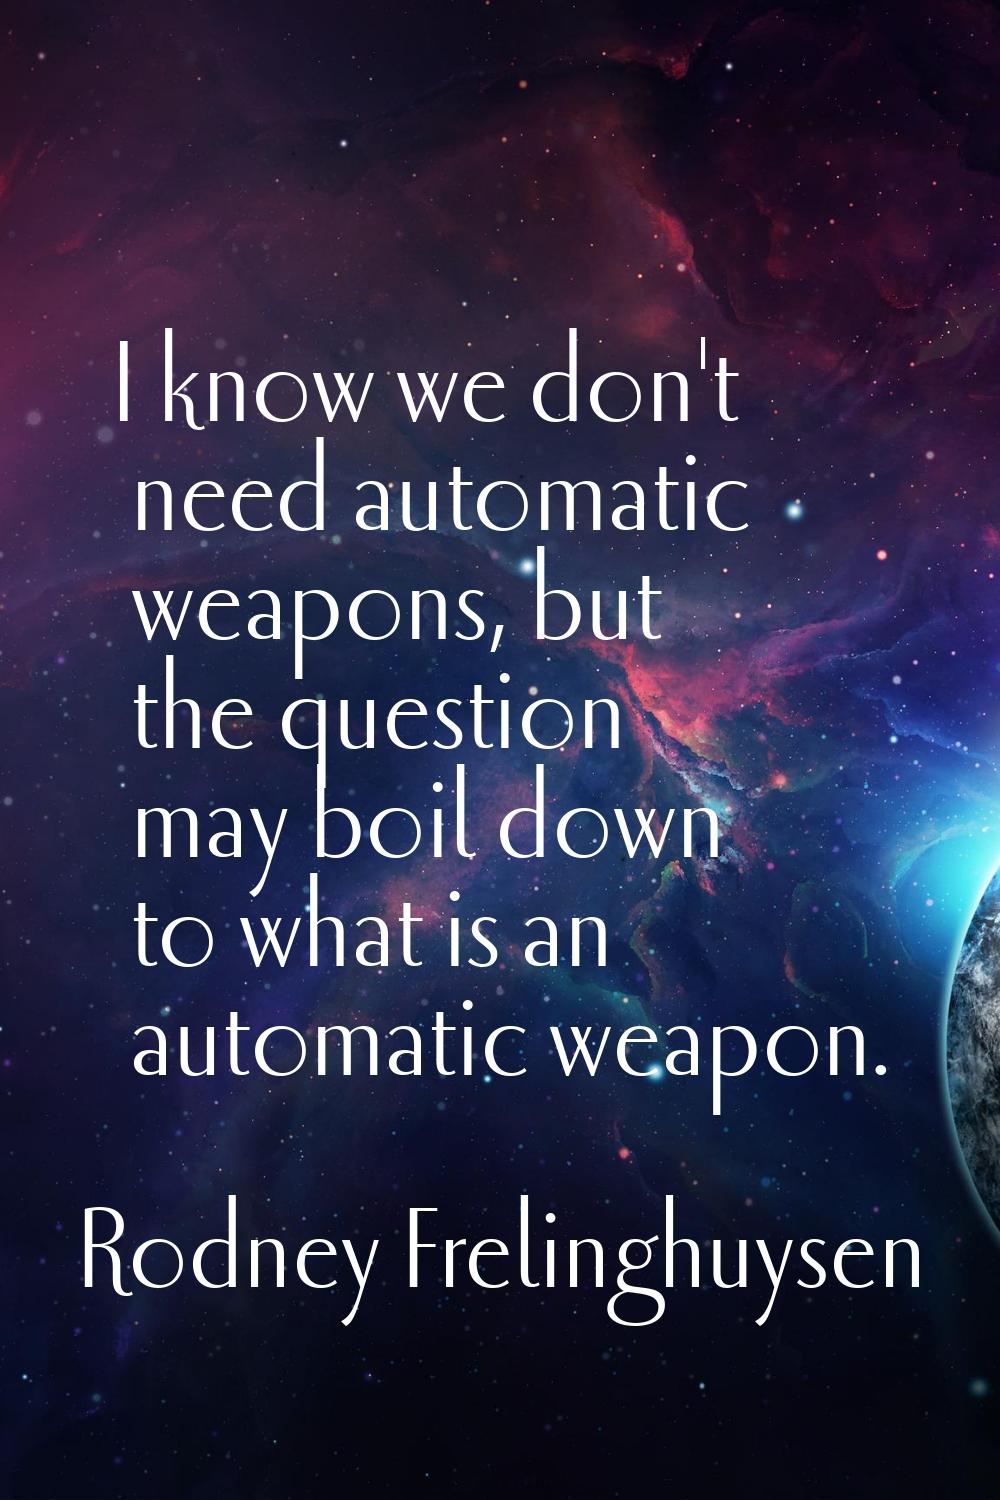 I know we don't need automatic weapons, but the question may boil down to what is an automatic weap